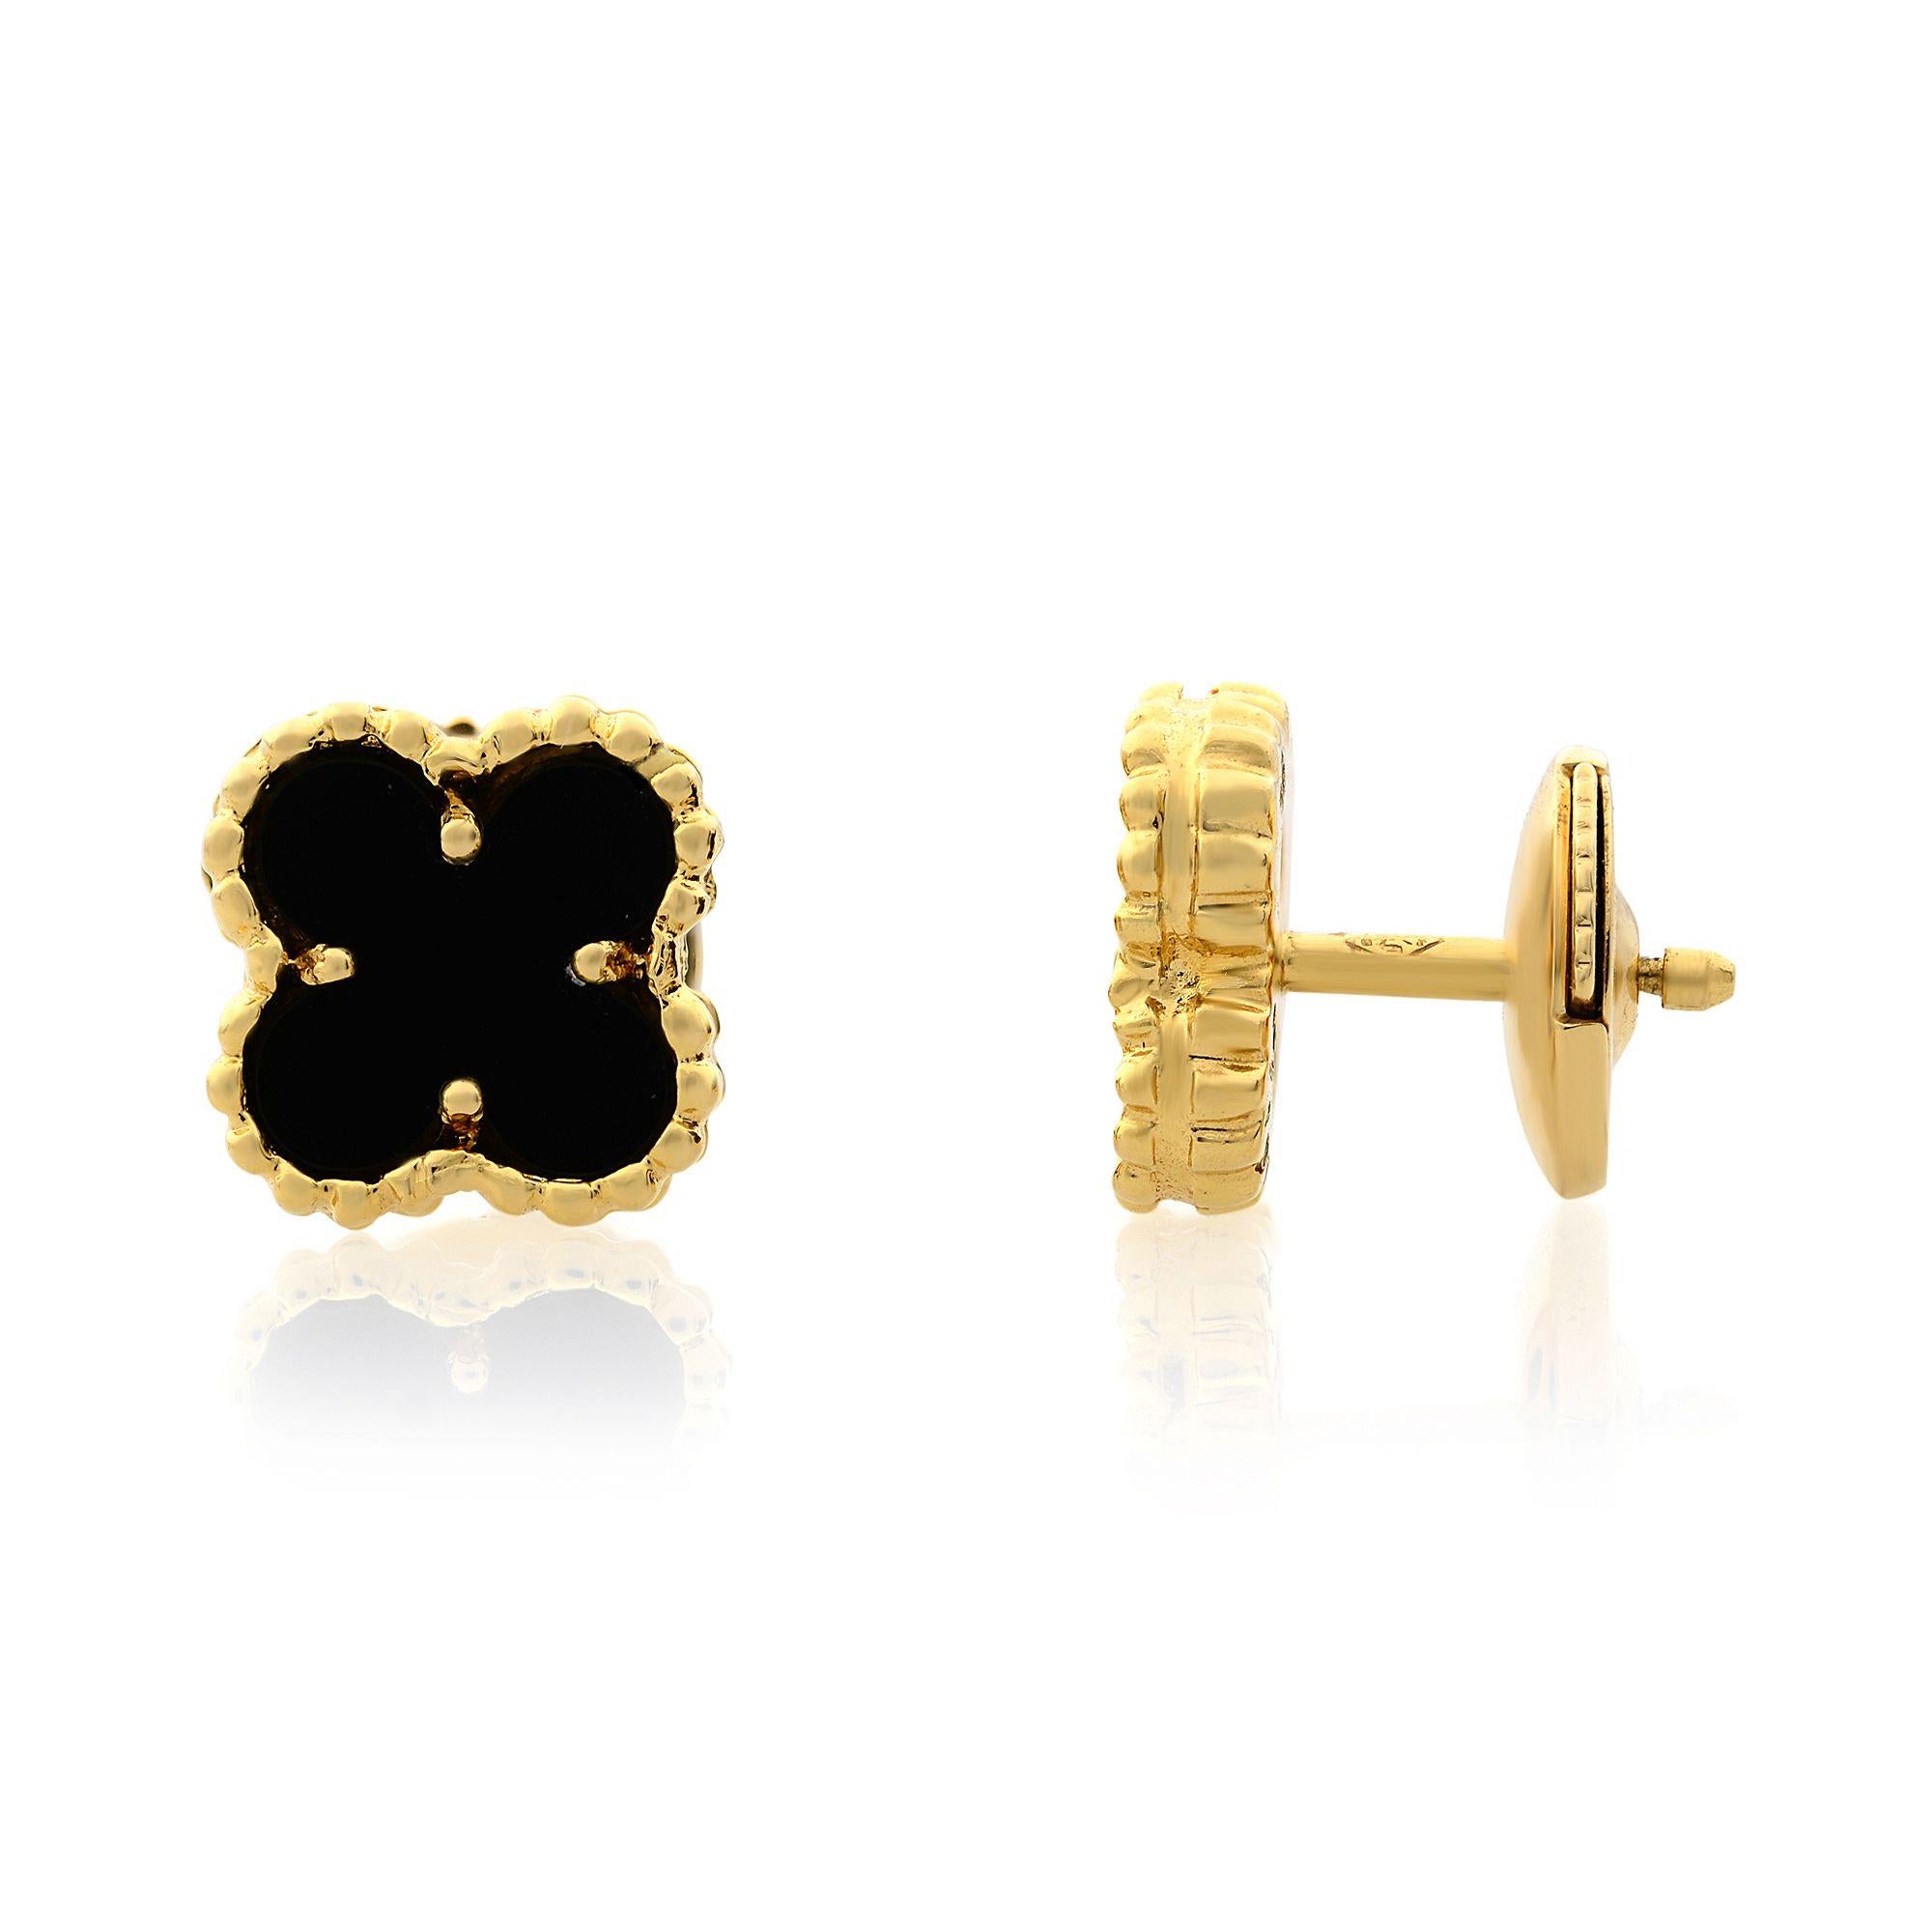 The Sweet Alhambra jewelry creations by Van Cleef & Arpels have featured delightful lucky motifs in miniature form since 2007.
Sweet Alhambra ear studs,  18k yellow gold, 2  onyx stones, small model, 8mm.
Excellent pre-owned condition, original